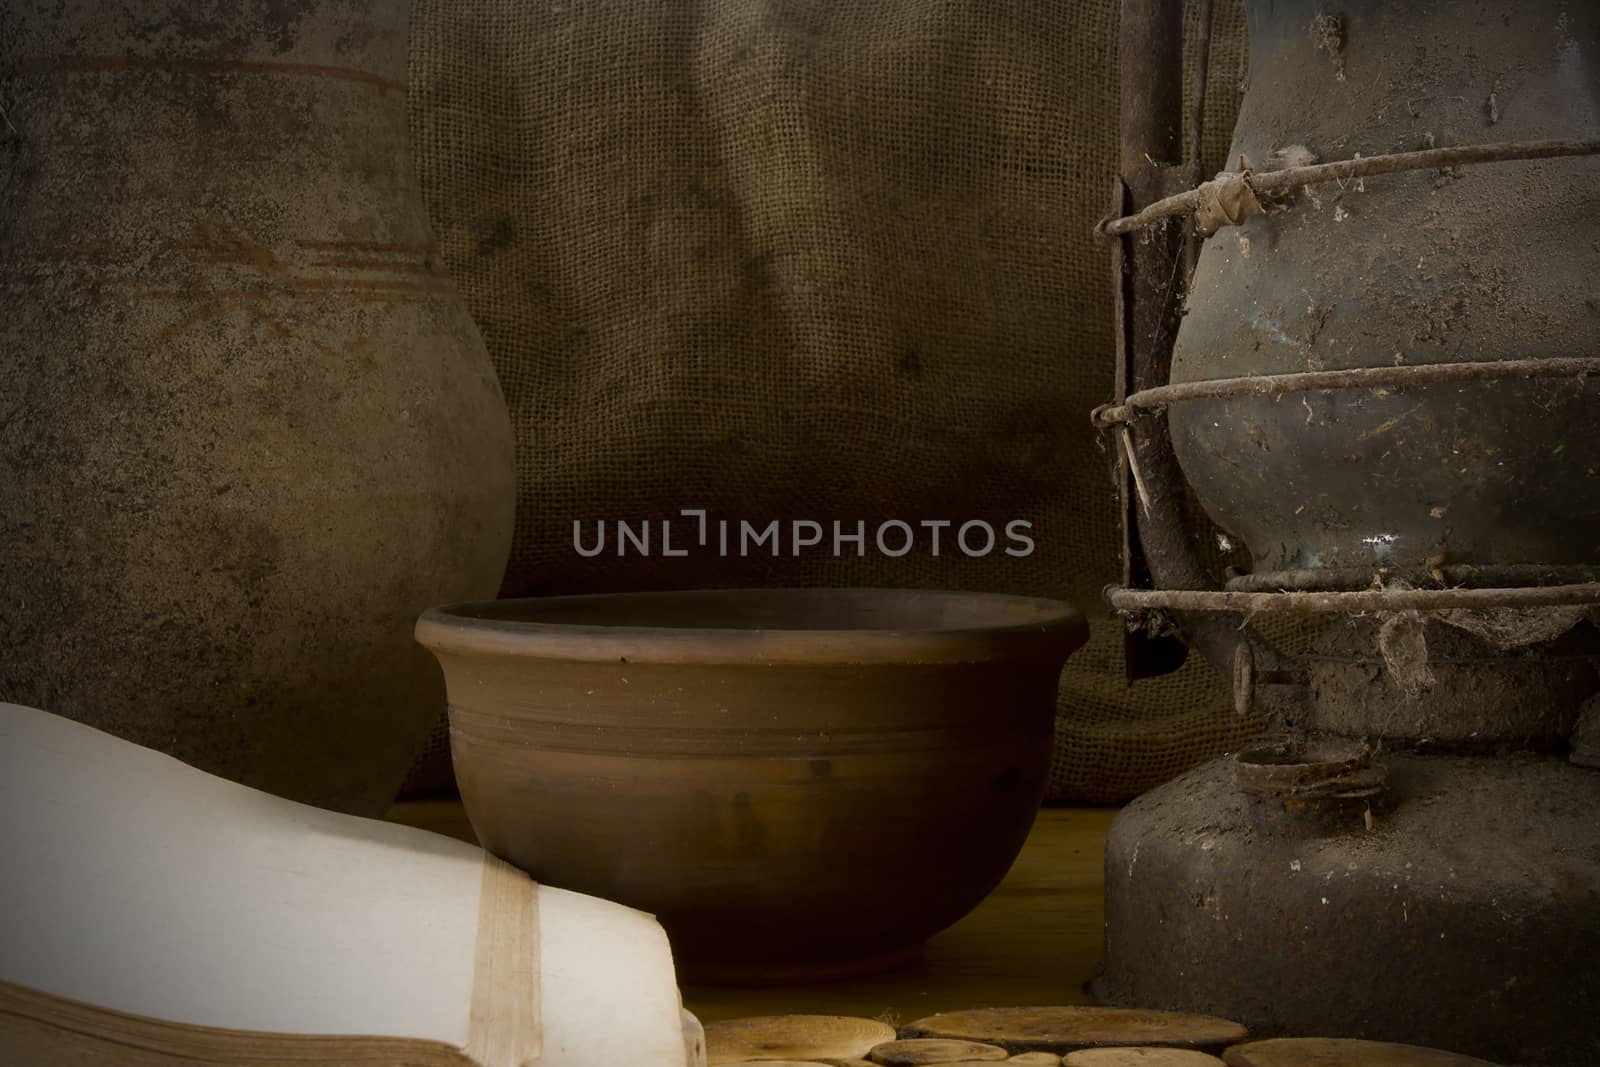 Vintage still life with pottery on the background of sacking